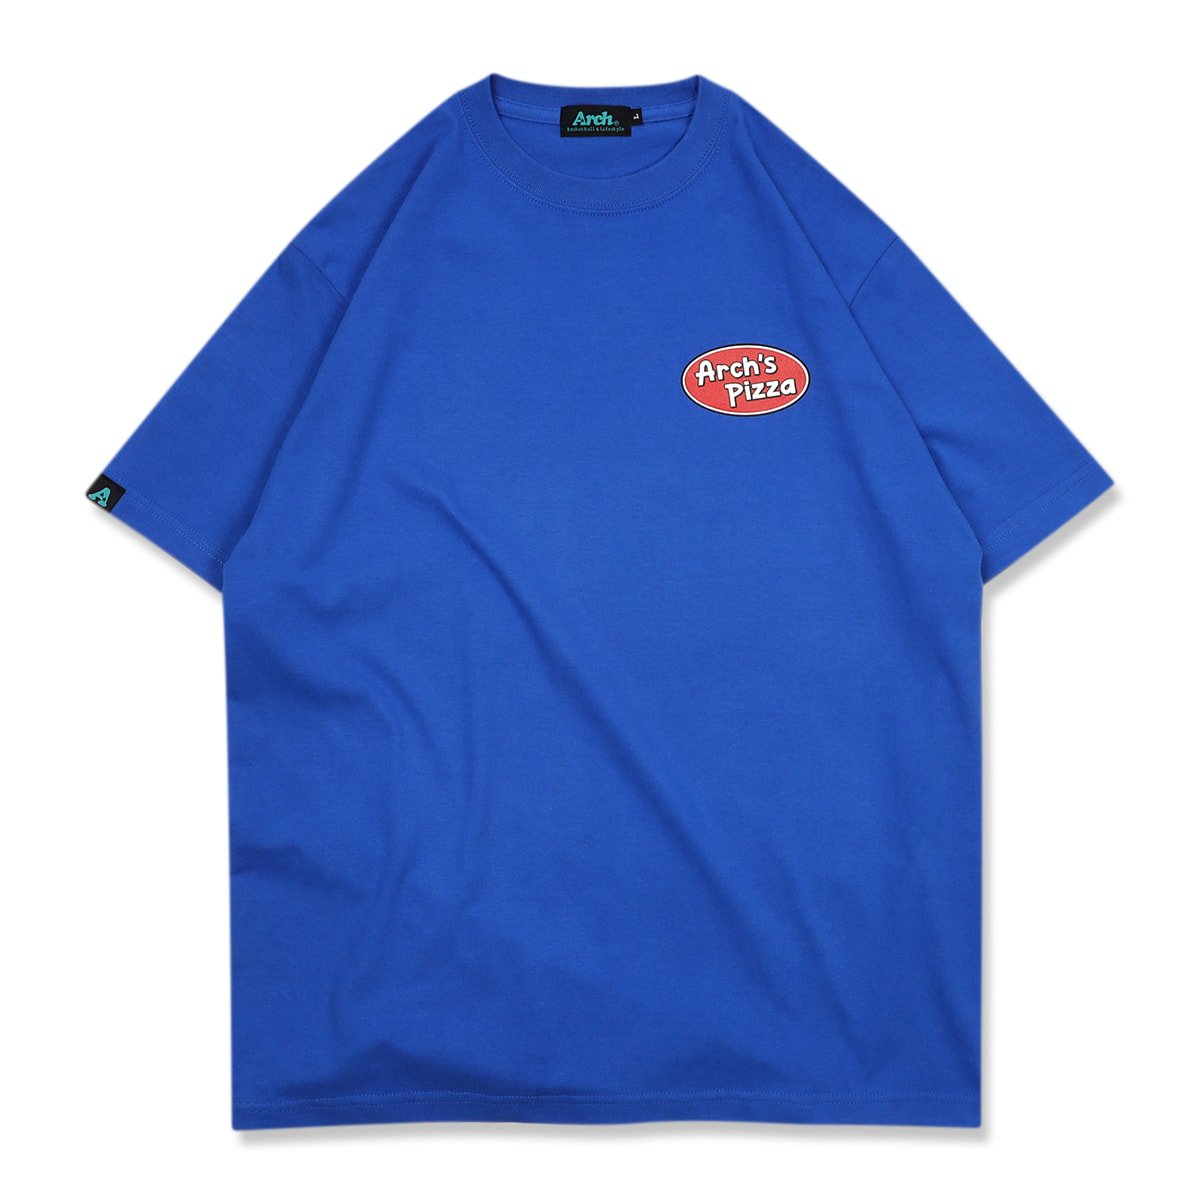 Arch's pizza tee【blue】